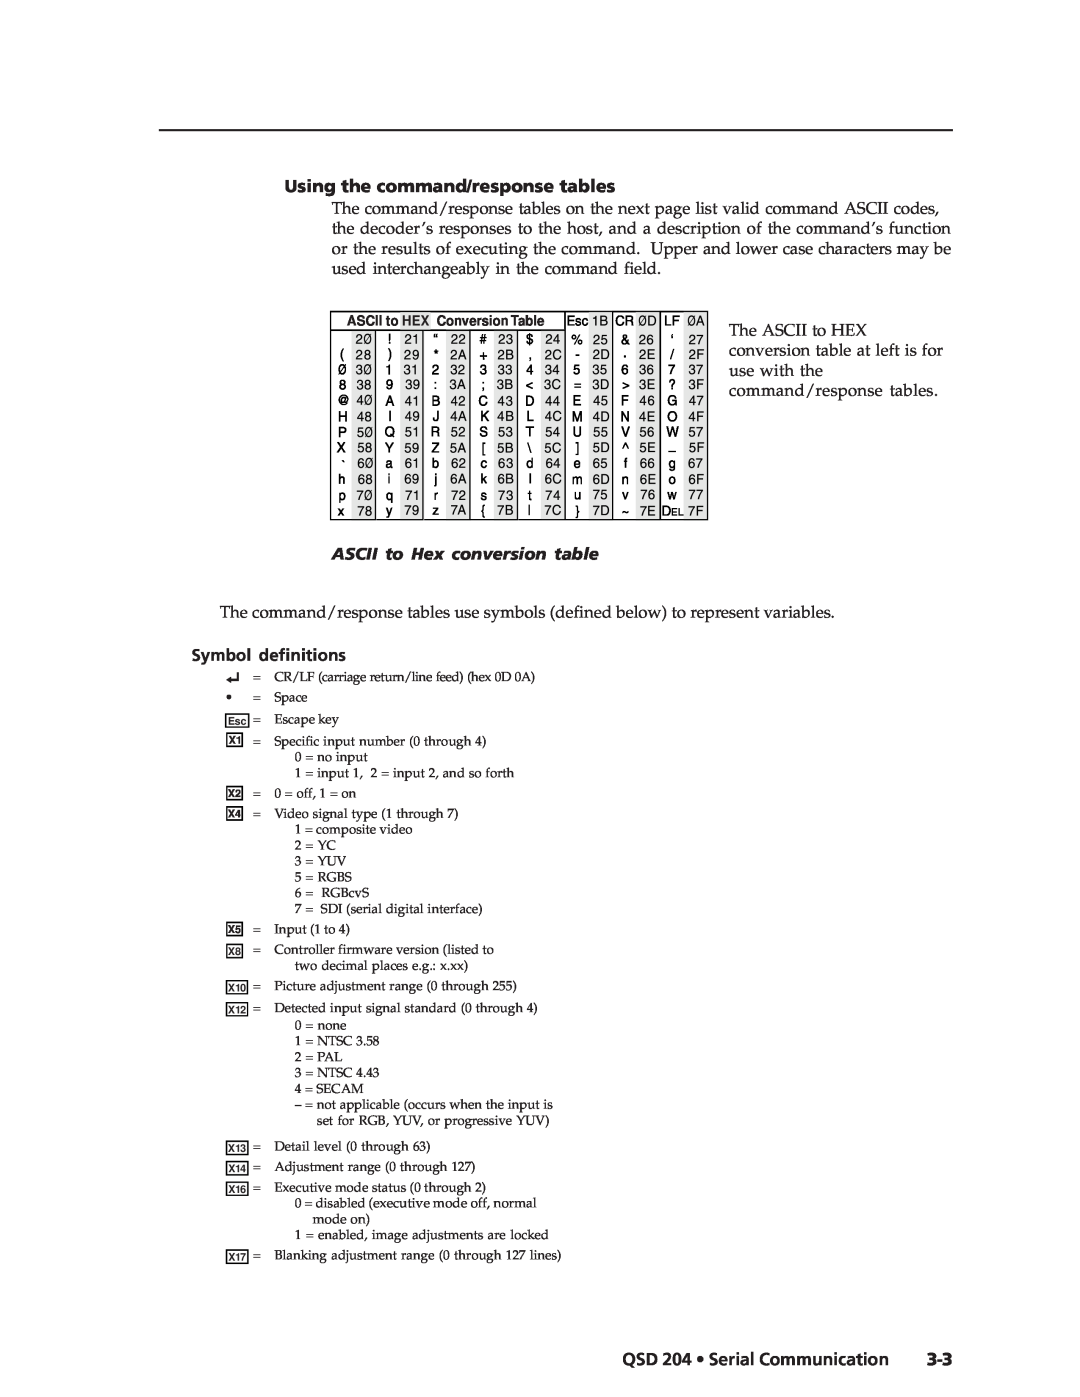 Extron electronic QSD 204 D manual Using the command/response tables, ASCII to Hex conversion table, Symbol definitions 